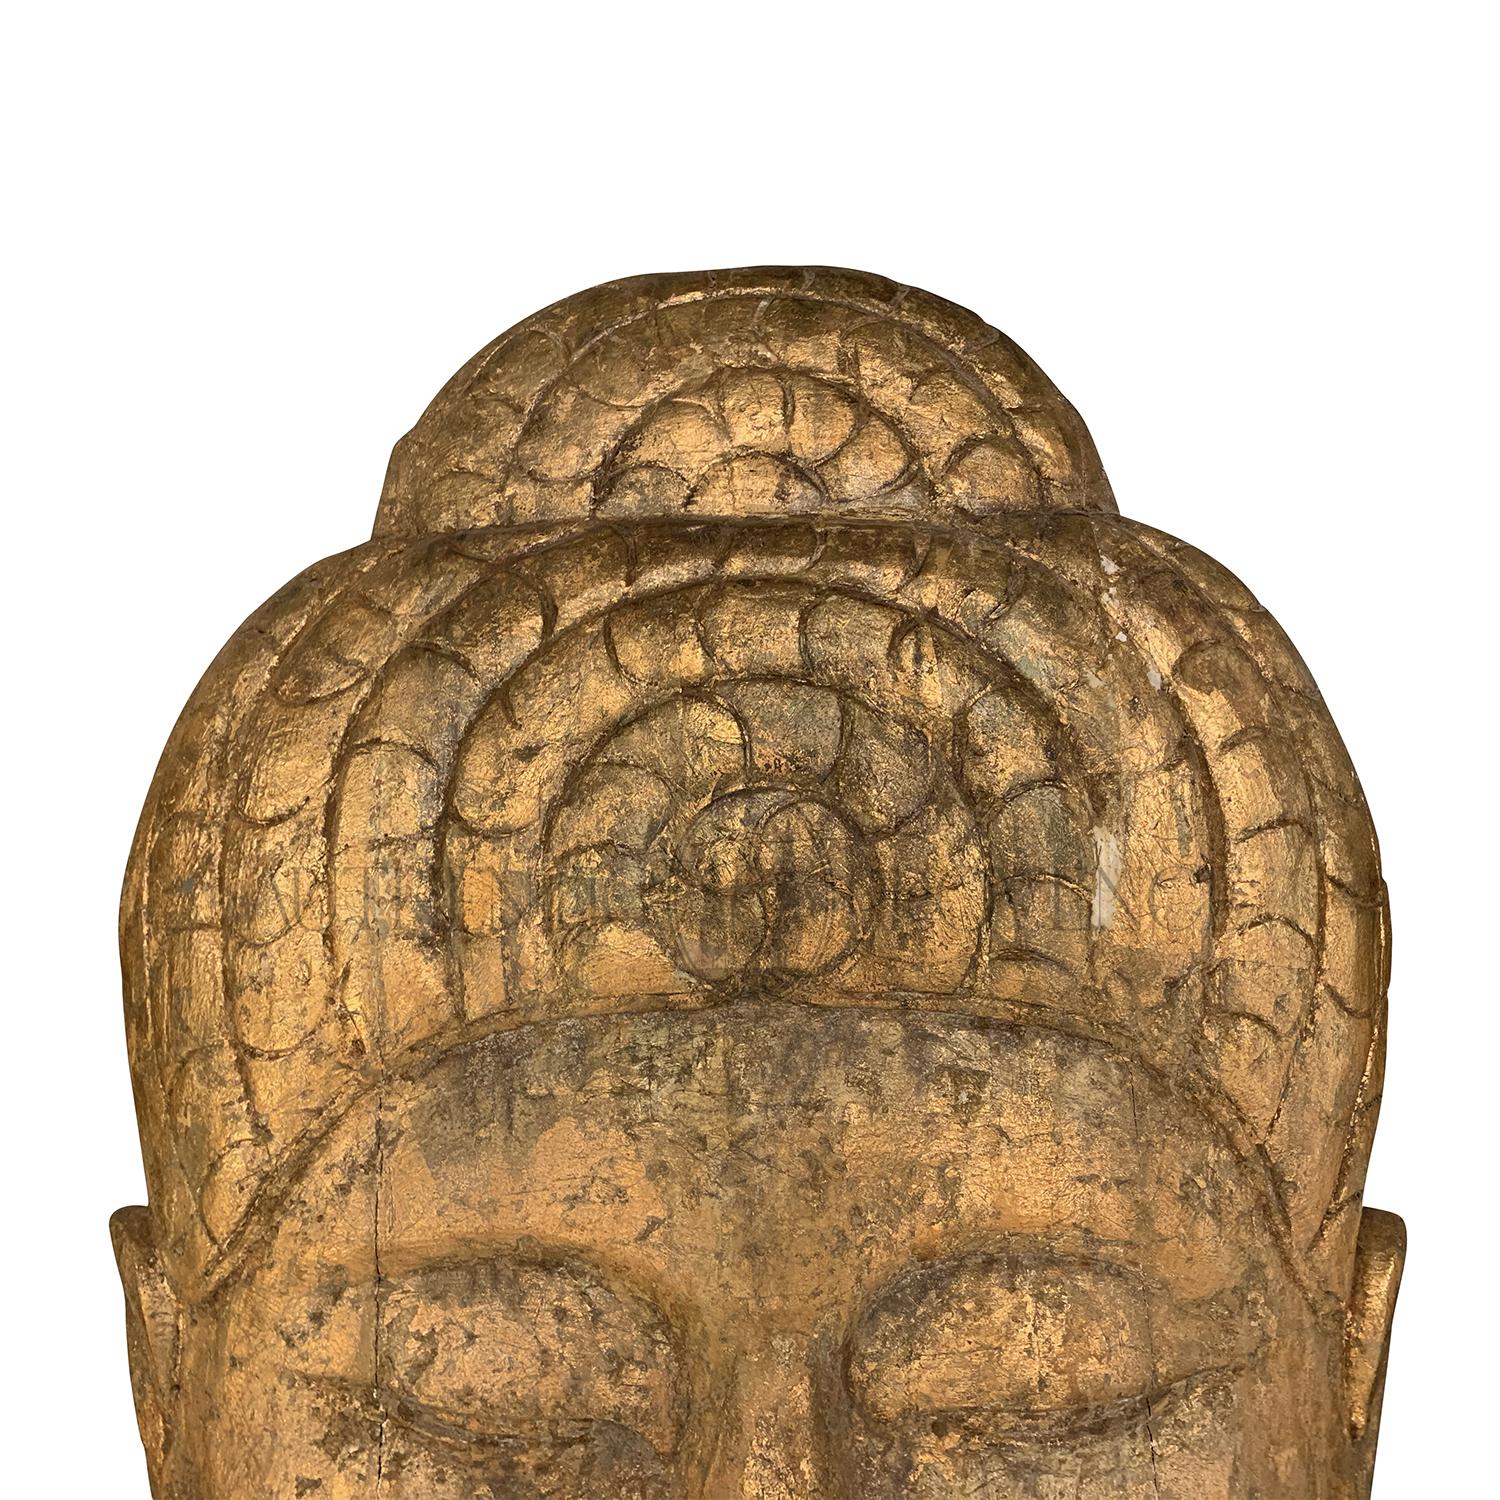 A gold-brown, antique Asian oversized wall mount decorative Buddha head in a very large scale. Handcrafted in tropical wood and gilded, in good condition. Wear consistent with age and use. circa 1910, Myanmar.